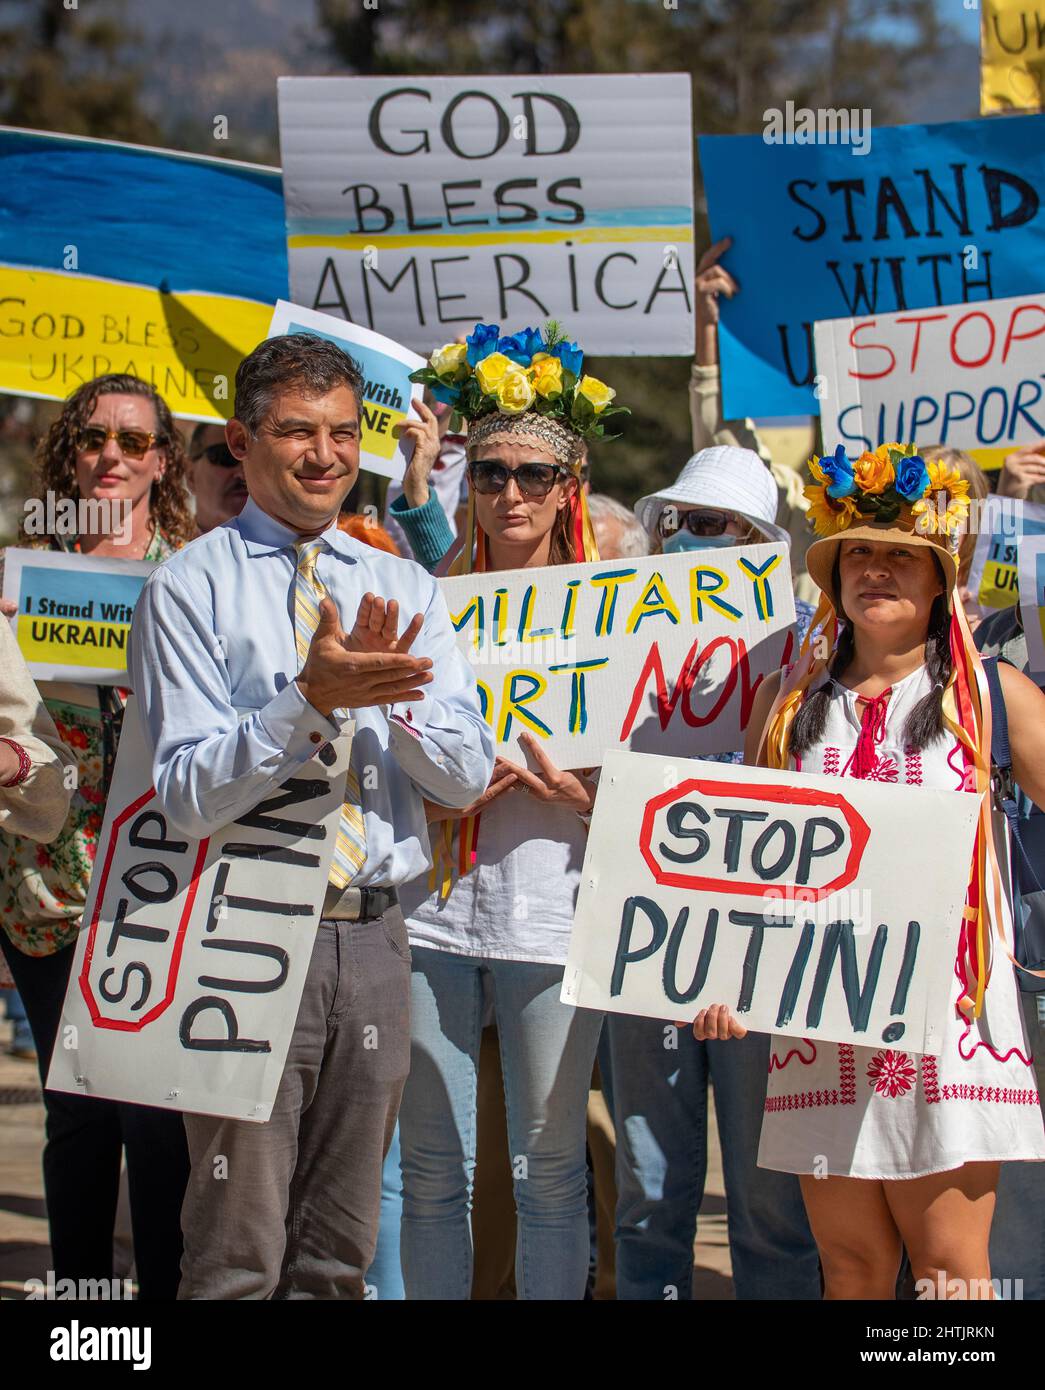 Santa Barbara, United States. 28th Feb, 2022. (L) Santa Barbara County Board of Supervisors, 1st District: Das Williams, Vice Chair. Santa Barbara Rally for Ukraine at the Santa Barbara County Courthouse in Santa Barbara, CA on February 28, 2022. The rally was held to invite all Ukrainians, Russians, and Americans from the Santa Barbara area to come express their support to help Ukraine stop Putin's war. (Photo by Rod Rolle/Sipa USA) Credit: Sipa USA/Alamy Live News Stock Photo